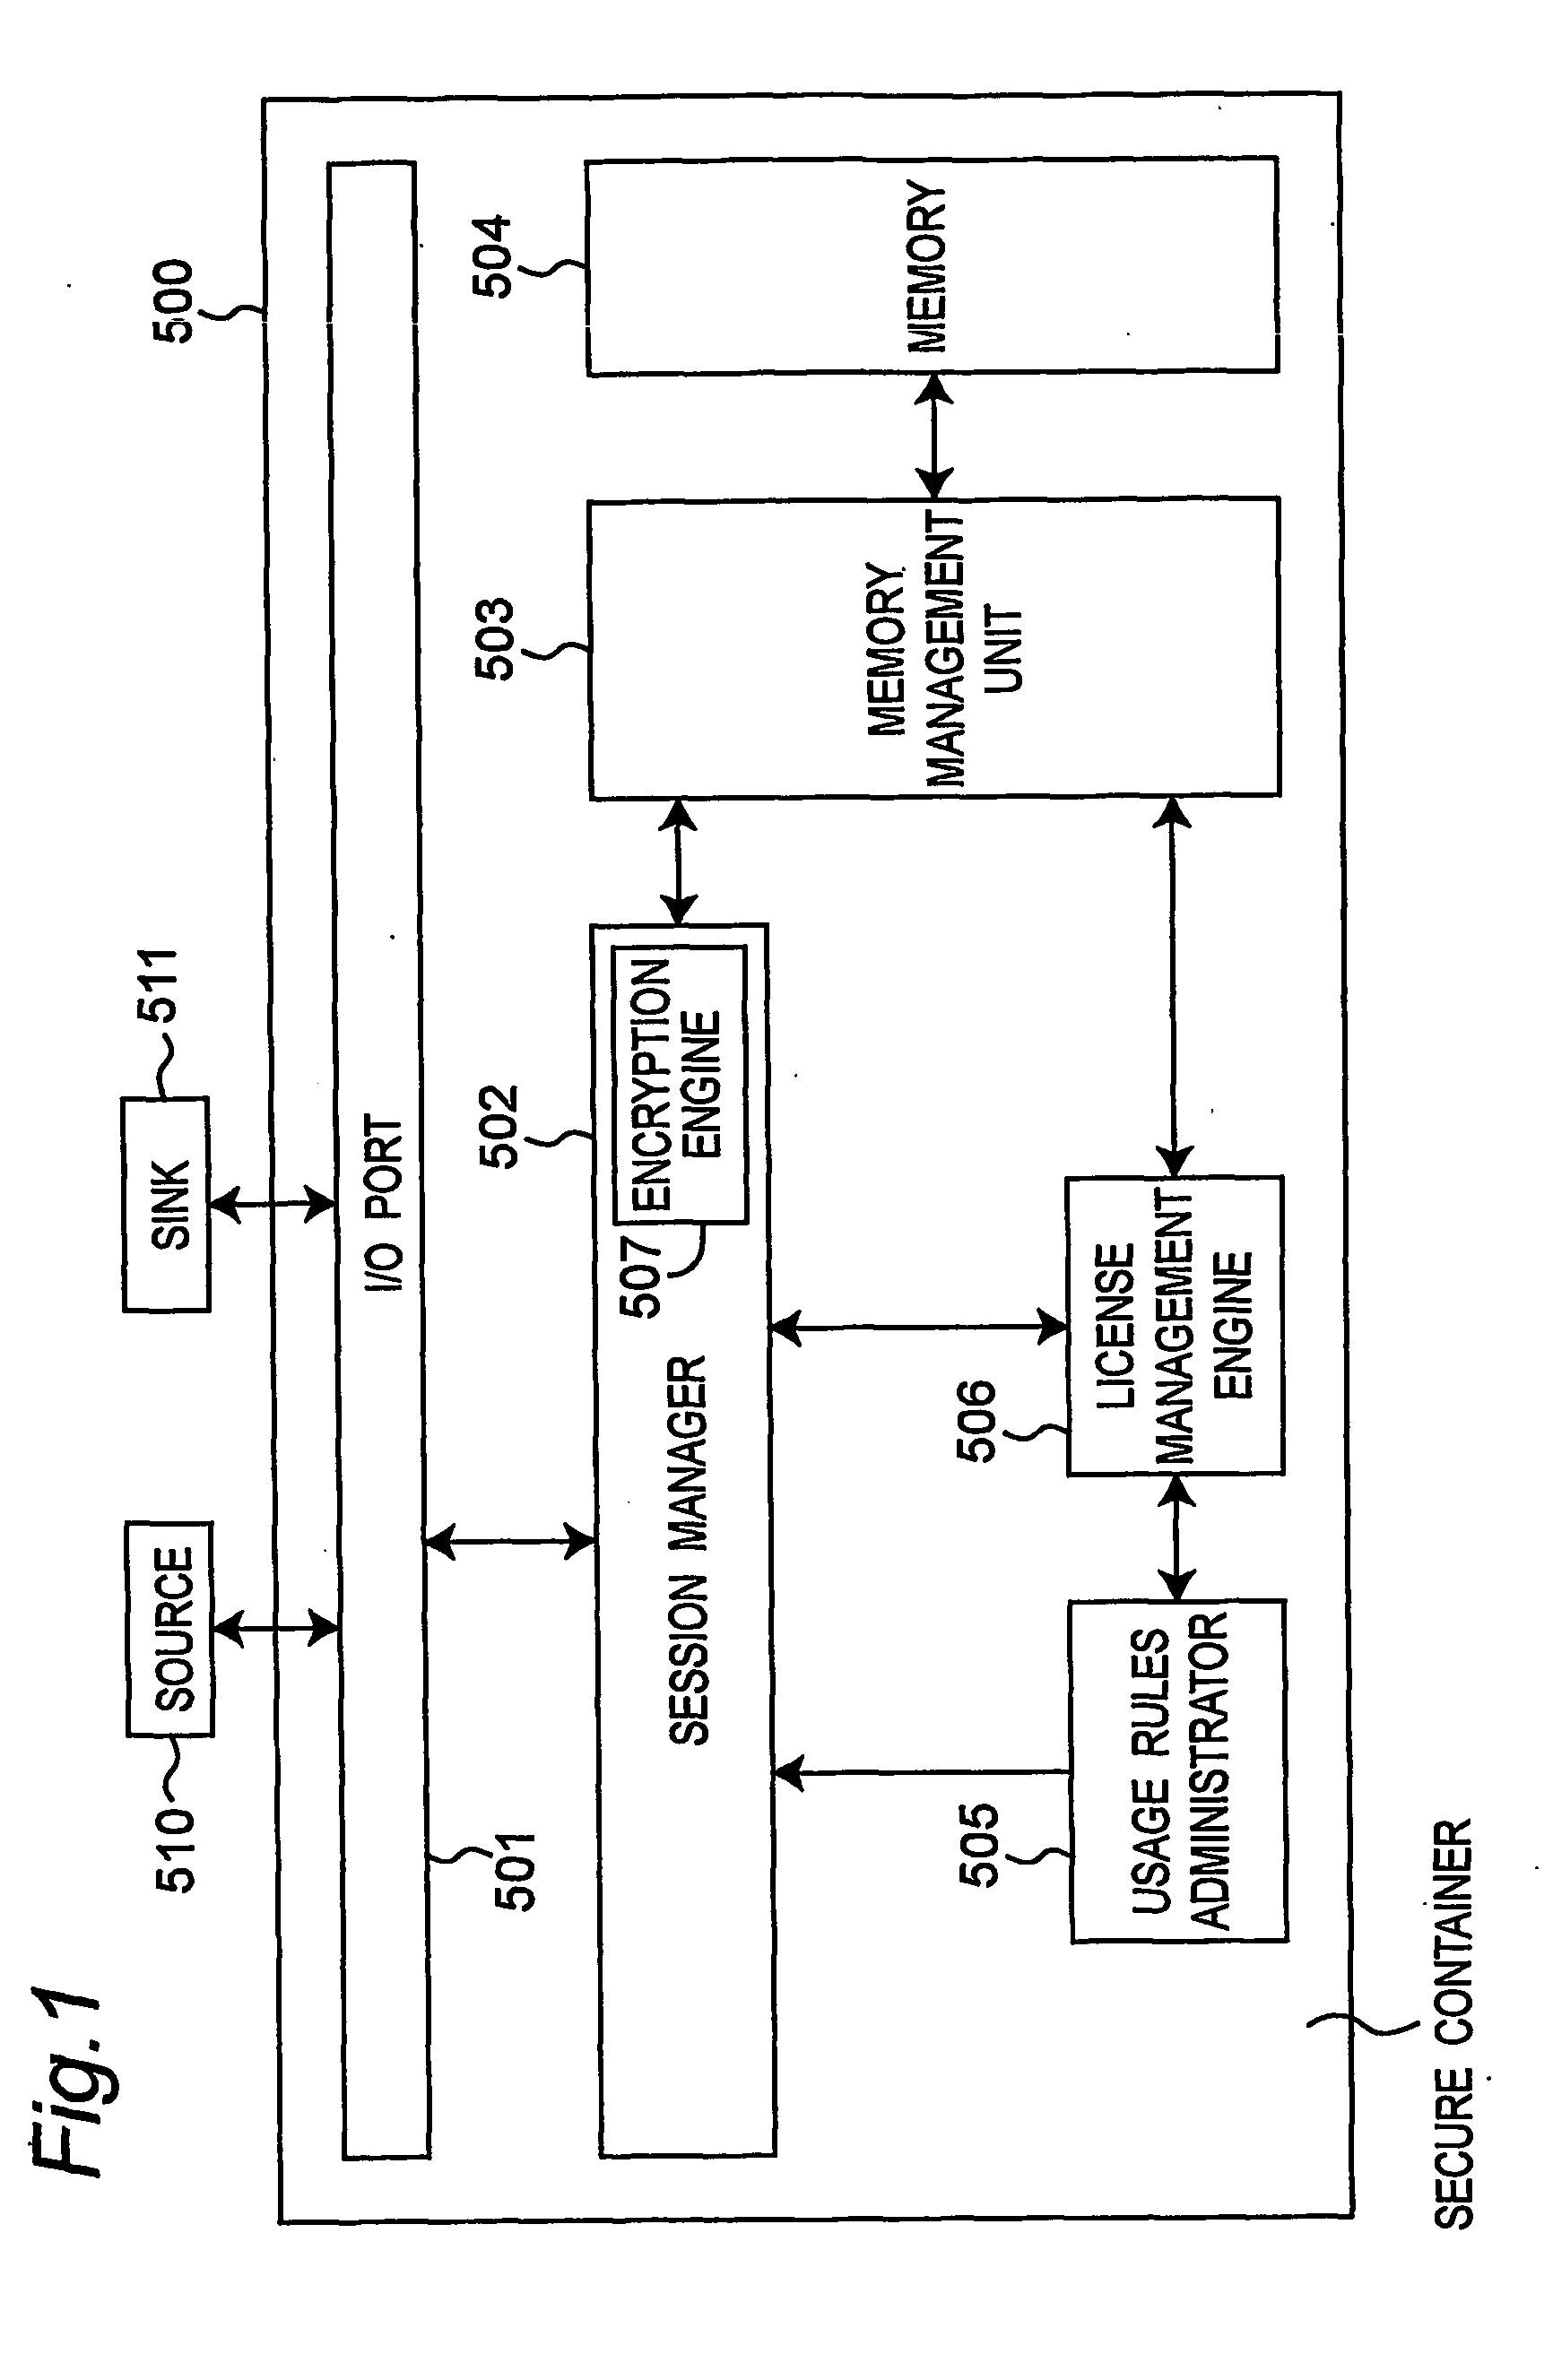 Data protection management apparatus and data protection management method